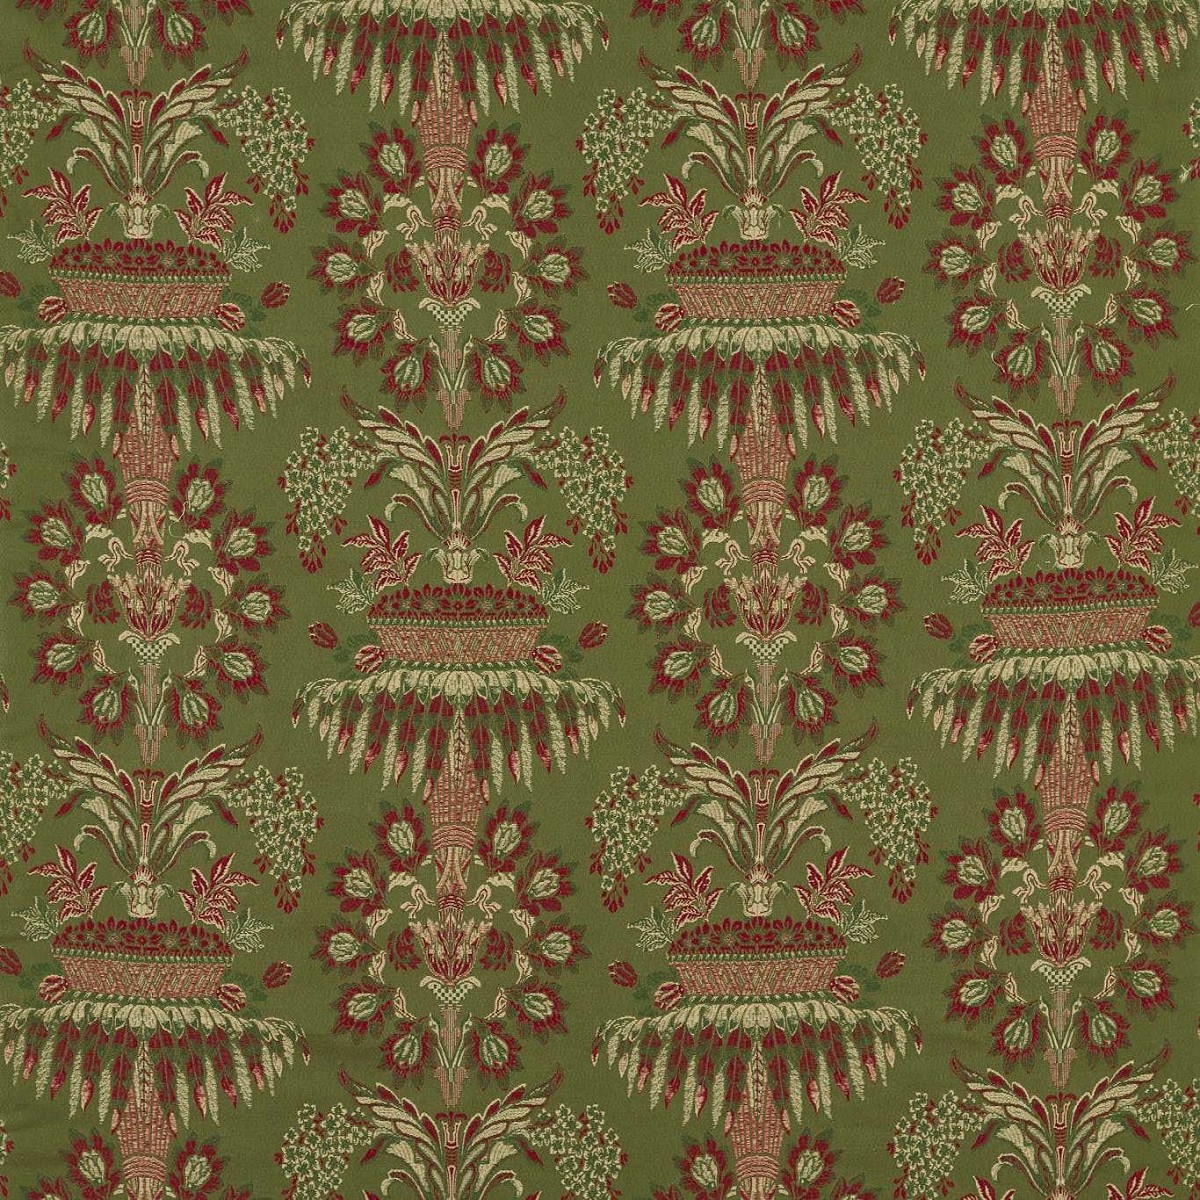 Long Gallery Brocade Olivine/Russet Fabric by Zoffany